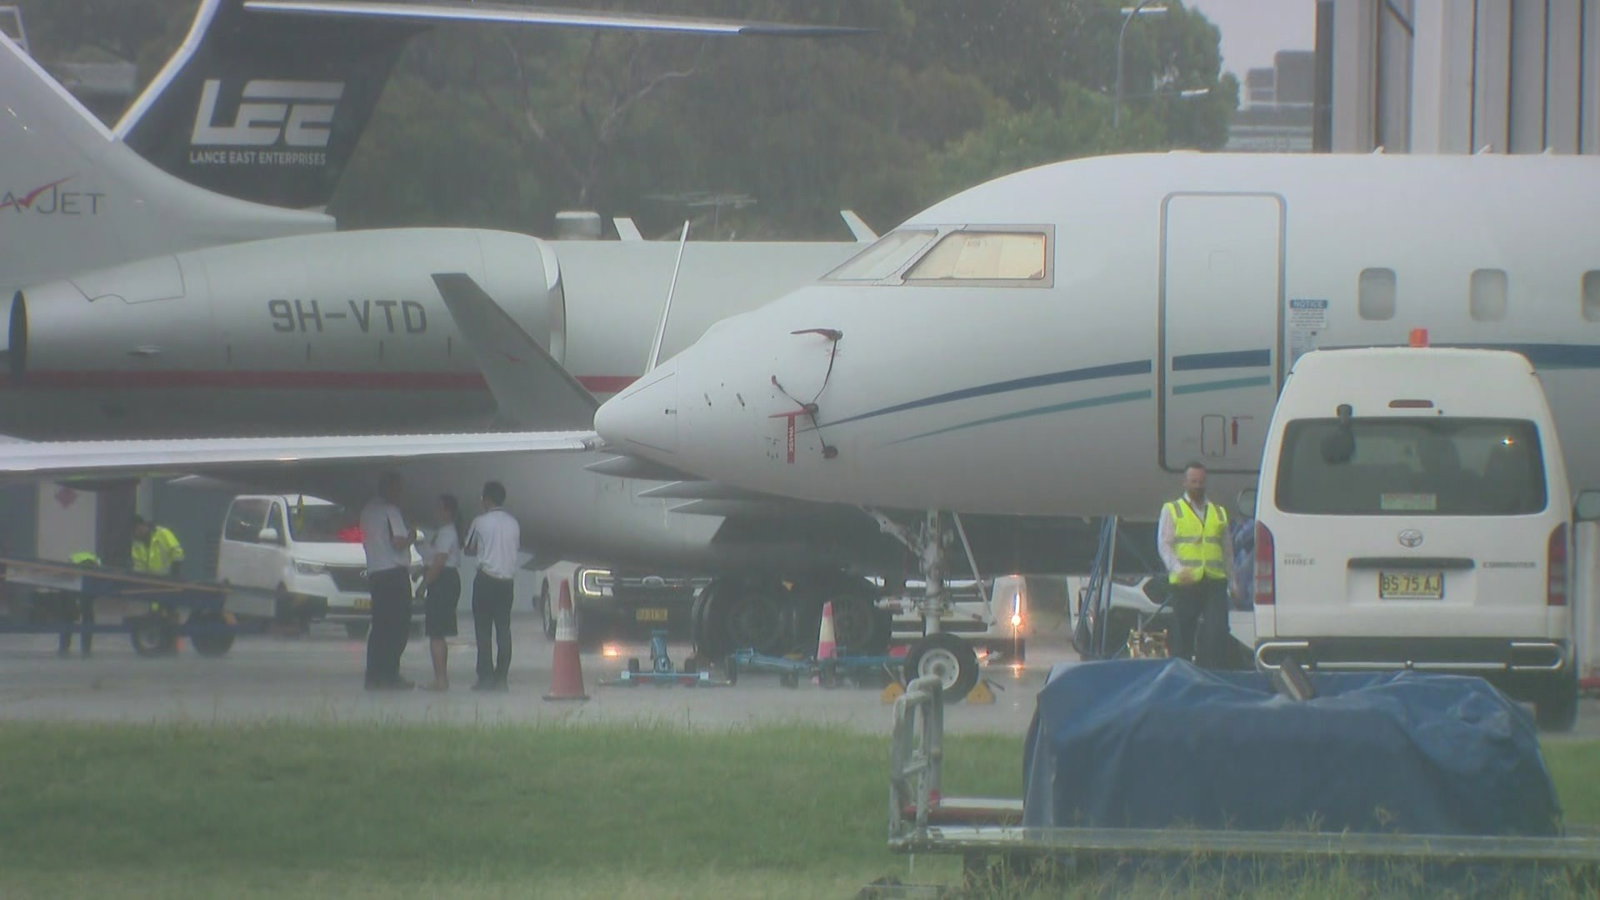 Two jet planes on tarmac with airport staff on the ground